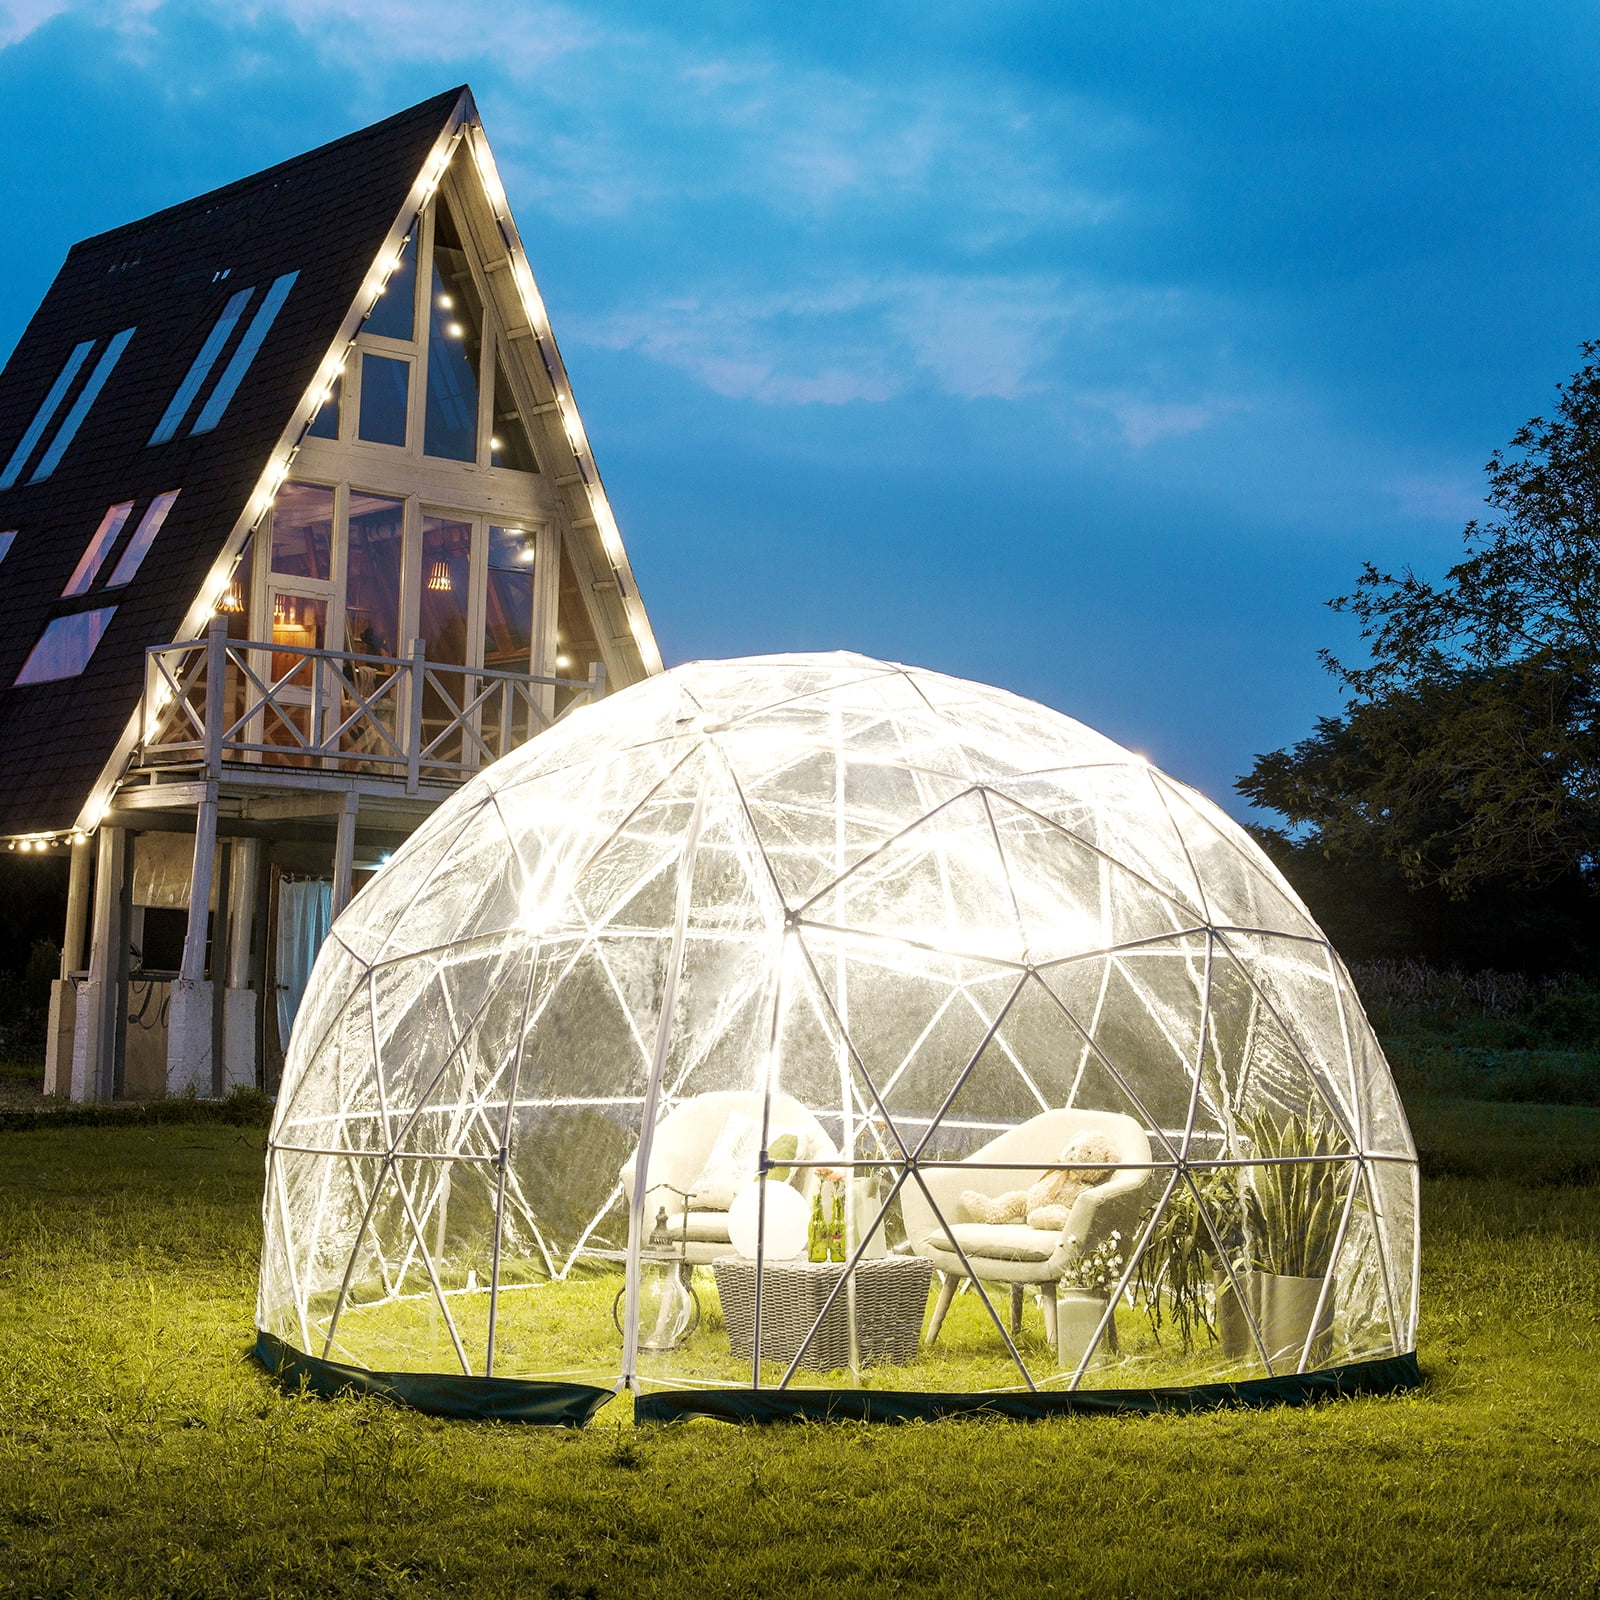 Janice plak Ongemak VEVOR Garden Dome 9.5ft - Geodesic Dome with PVC Cover - Bubble Tent with  Door and Windows for Sunbubble, Backyard, Outdoor Winter, Party -  Walmart.com